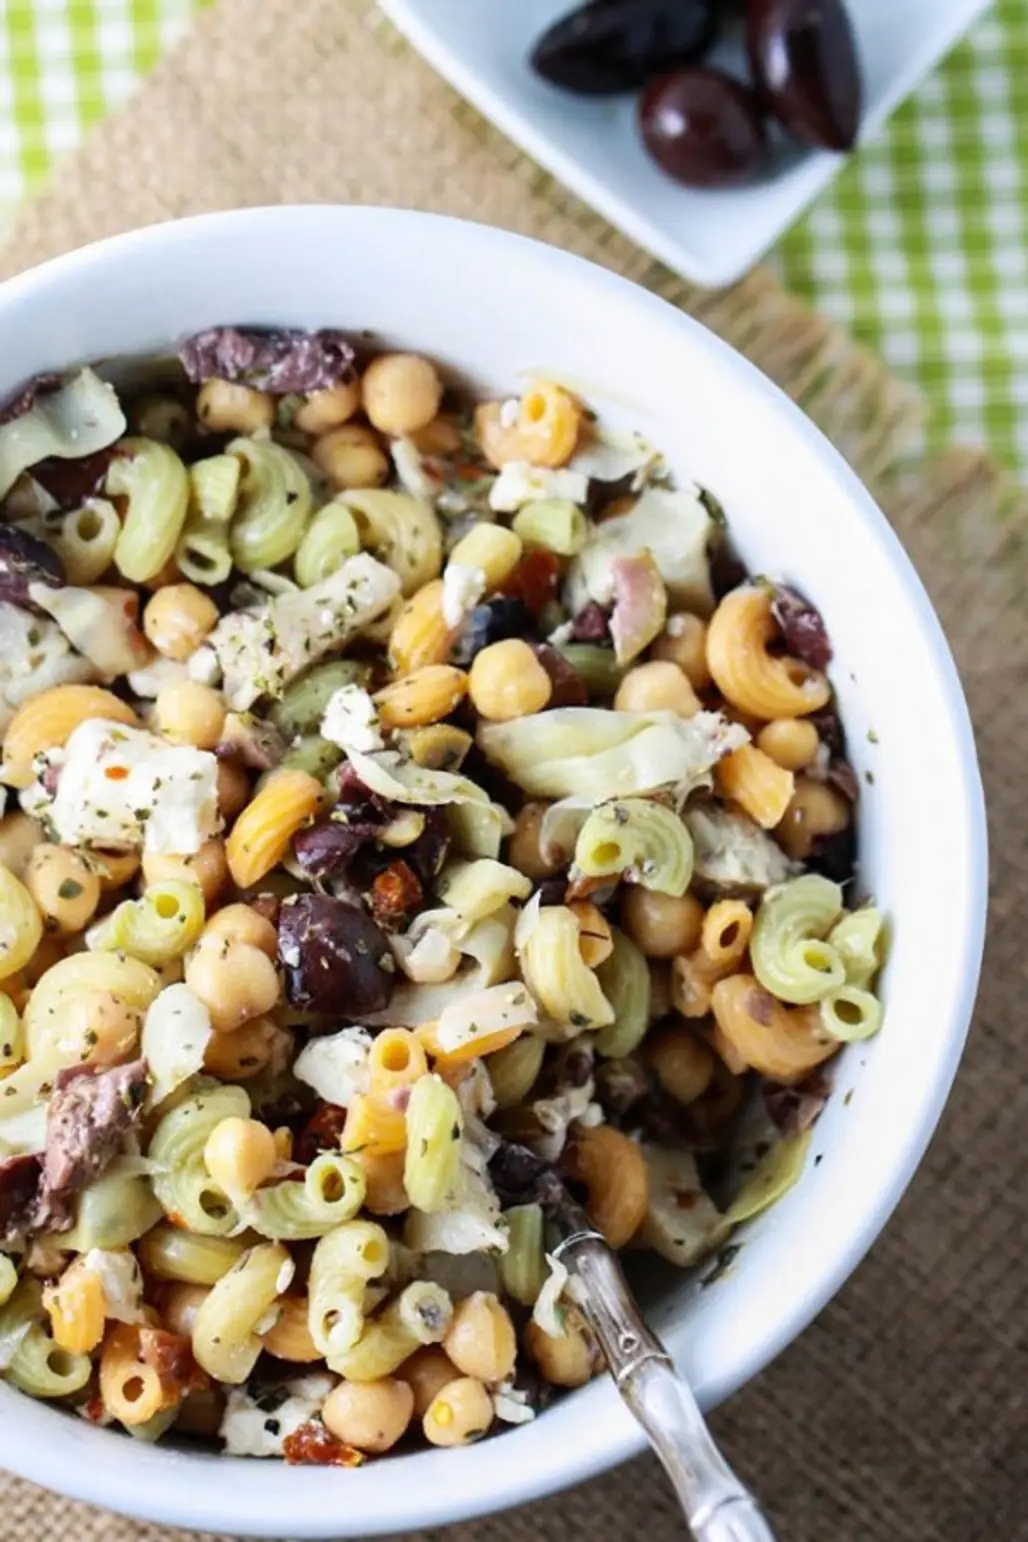 Pasta Salad with Chickpeas, Diced Tomatoes, and Lemon Dressing